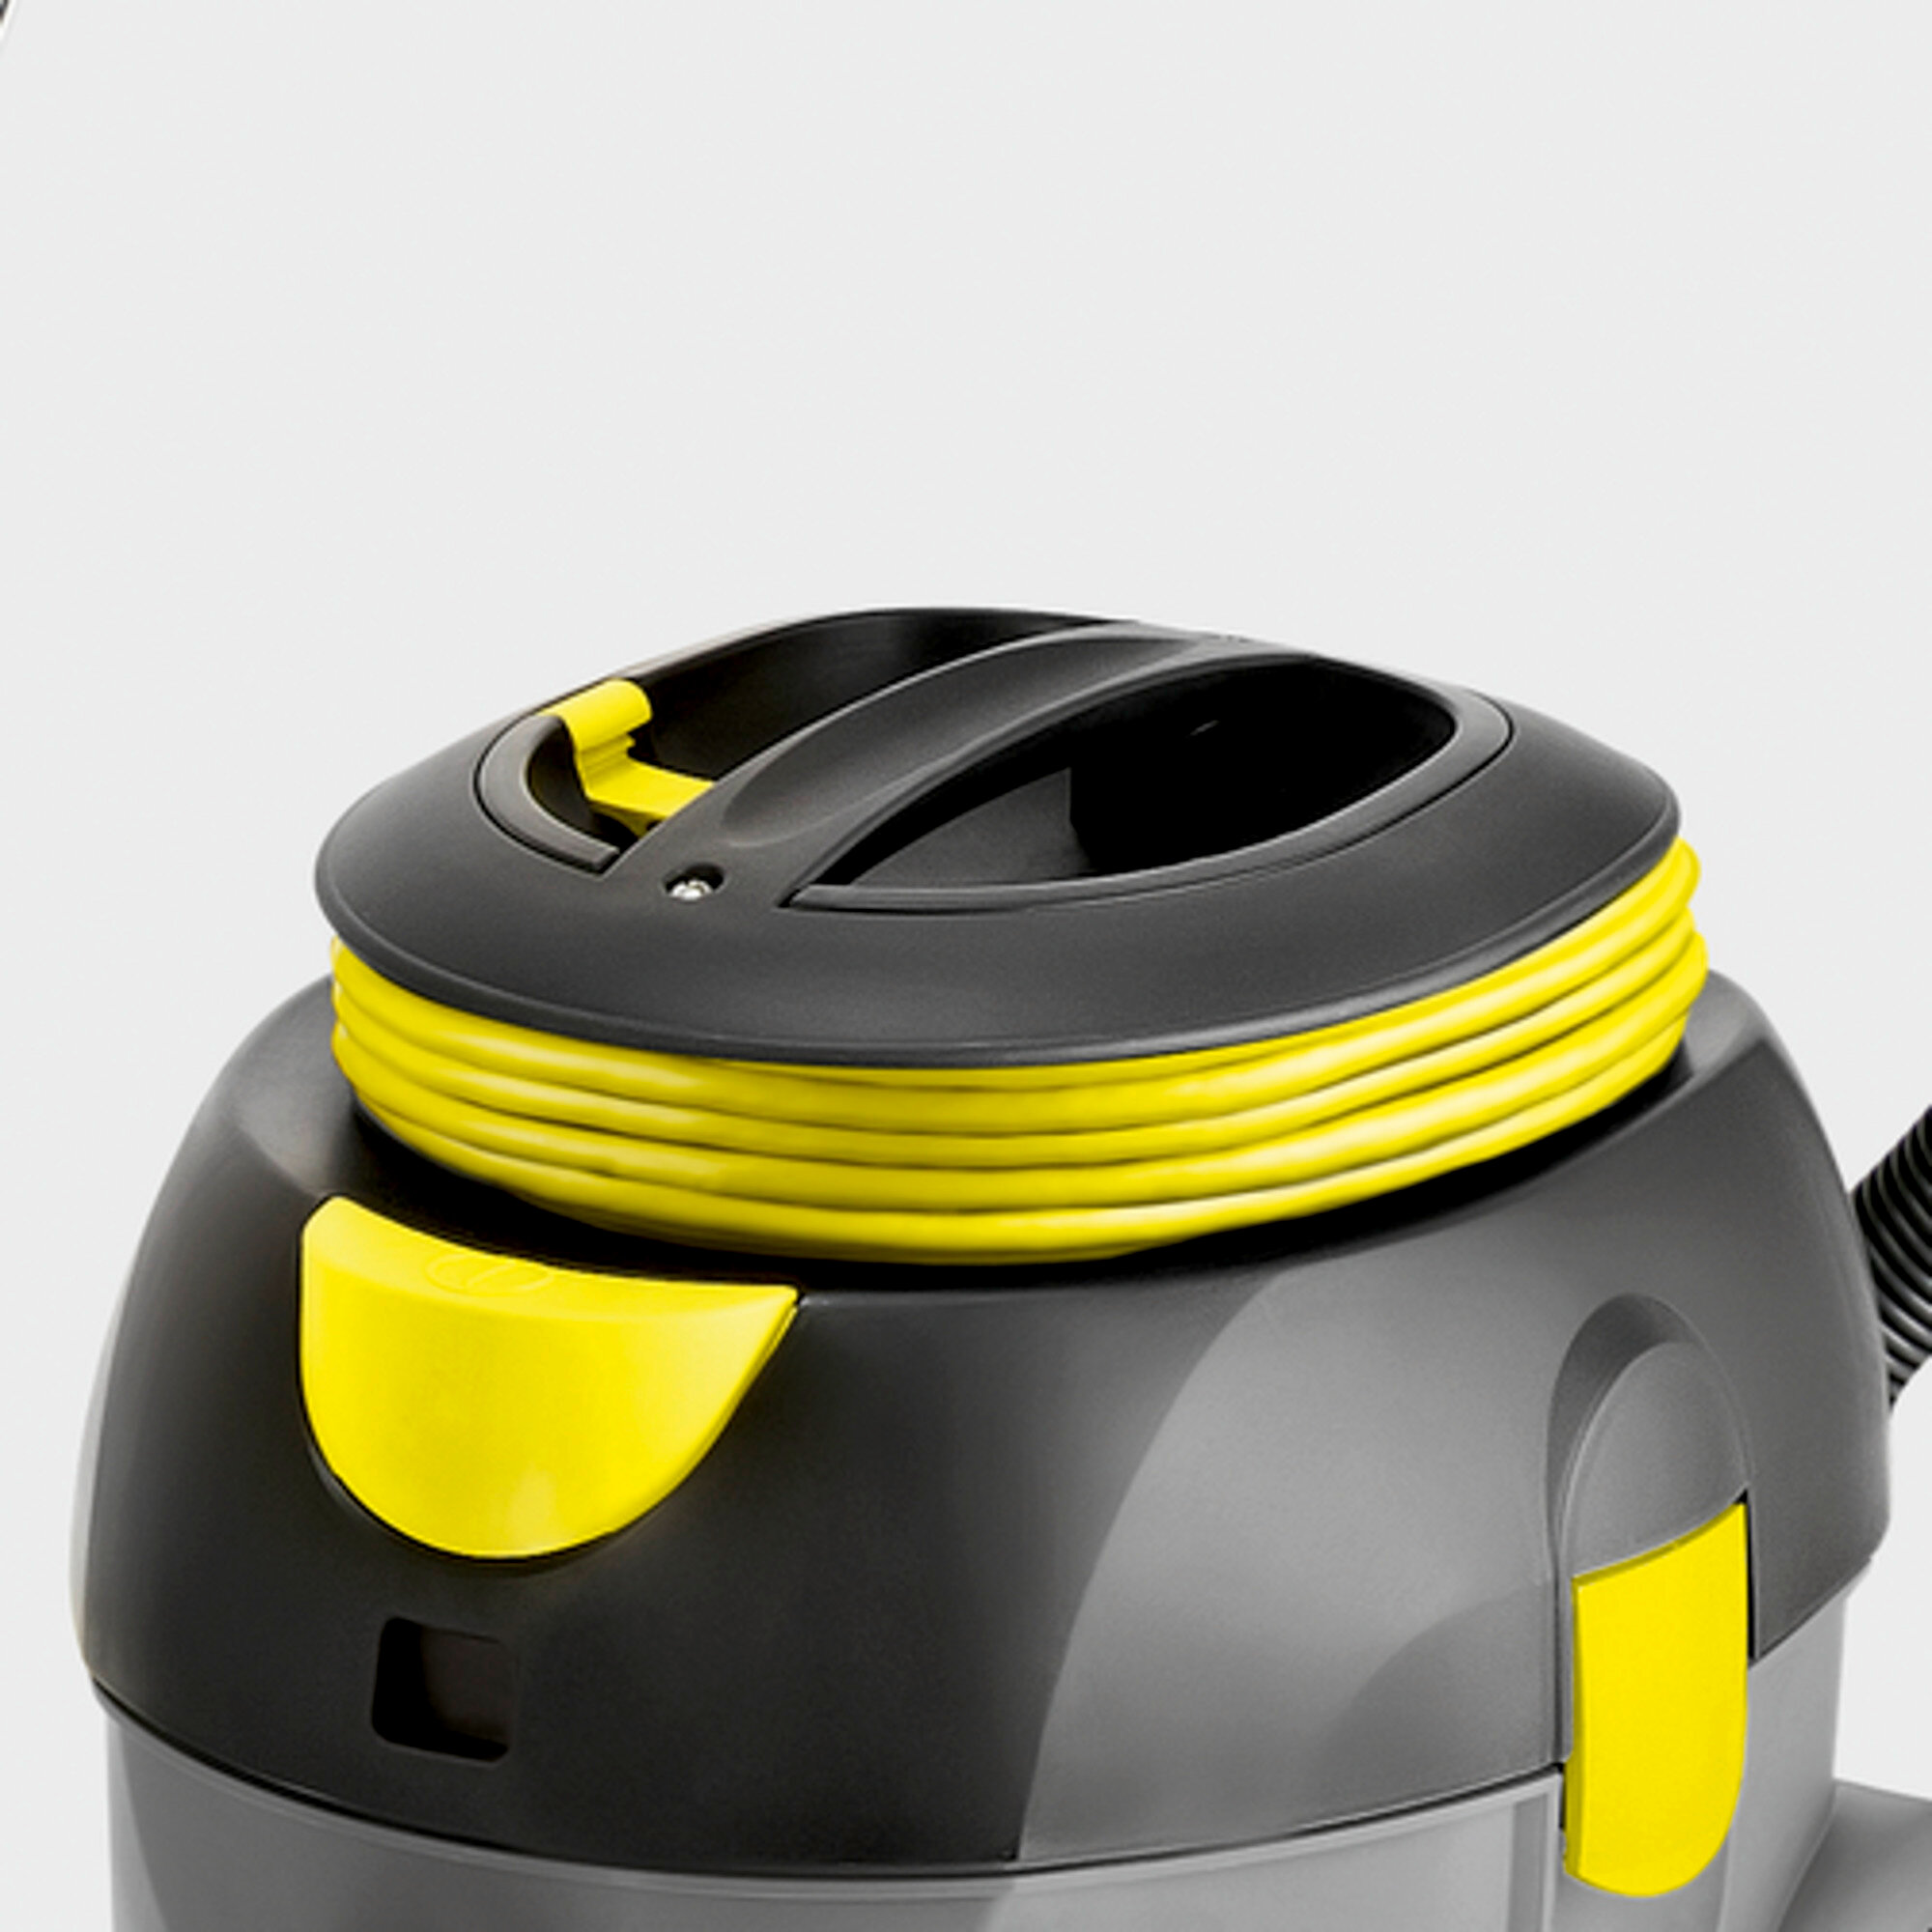 Dry vacuum cleaner T 12/1: On-board cord storage